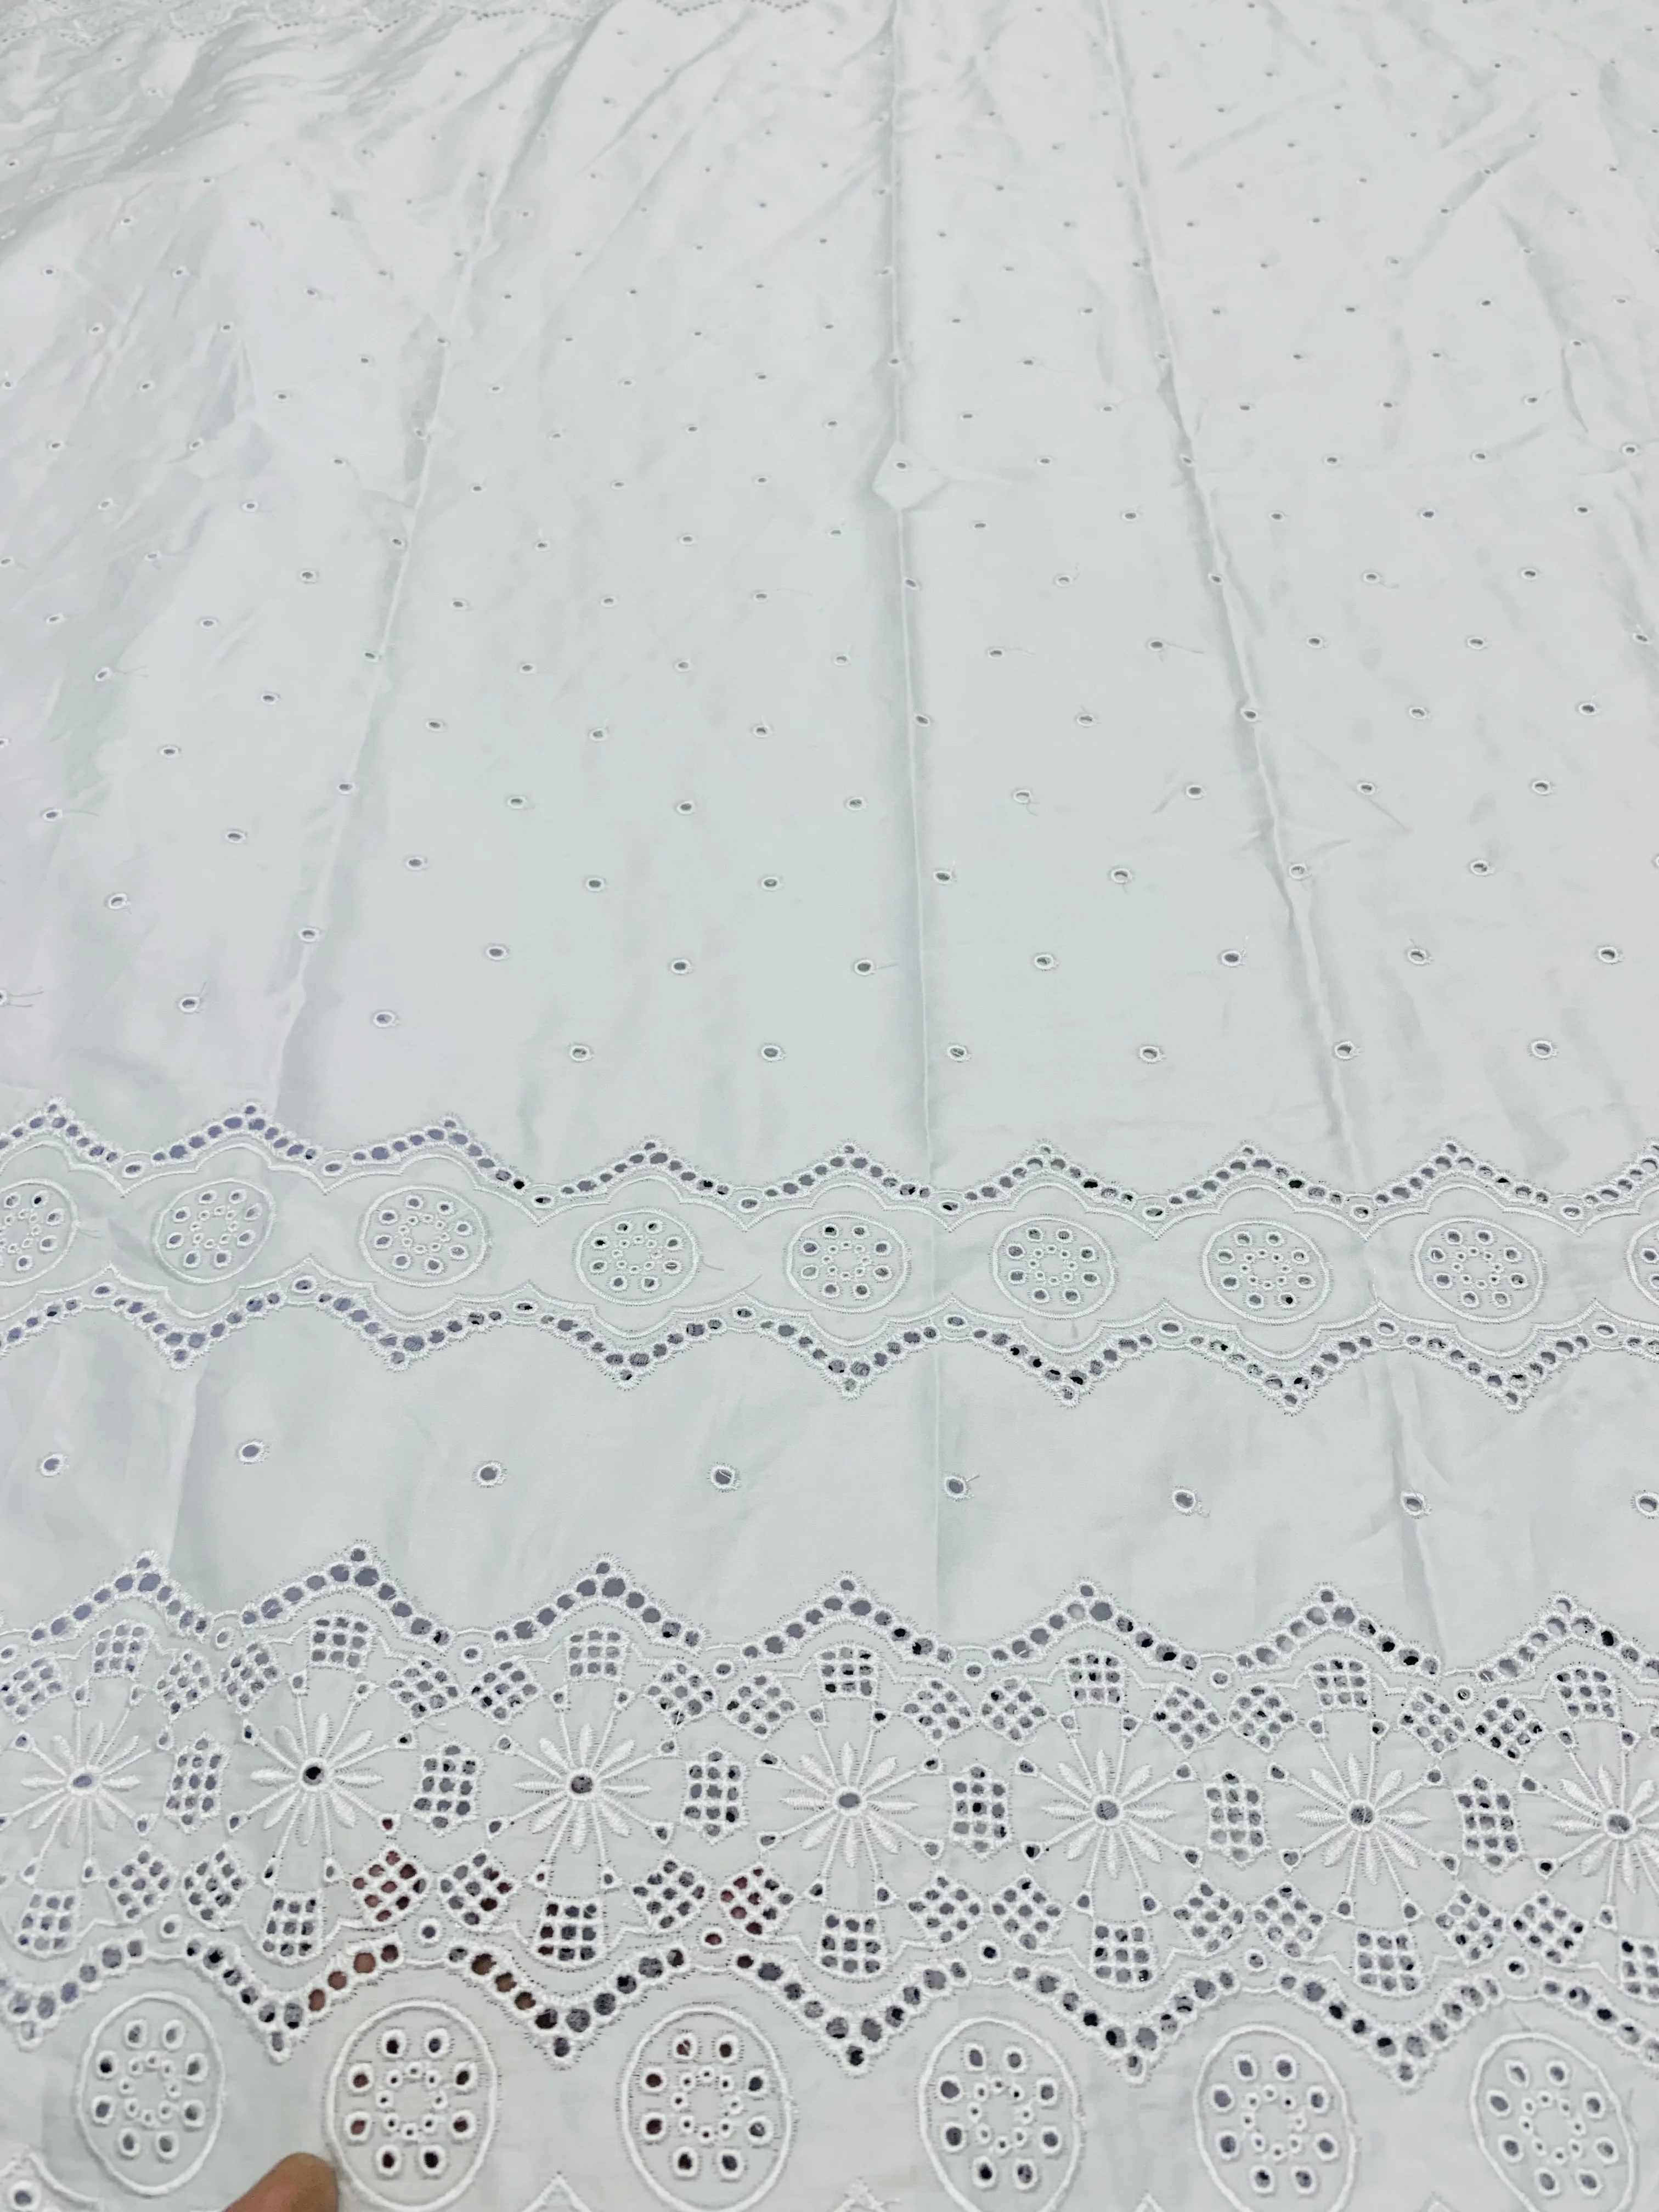 African Polish Dry Lace Fabric 2023 High Quality Swiss Voile Embroidery Fabric Lace Material For Men Dubai Style African Fabric